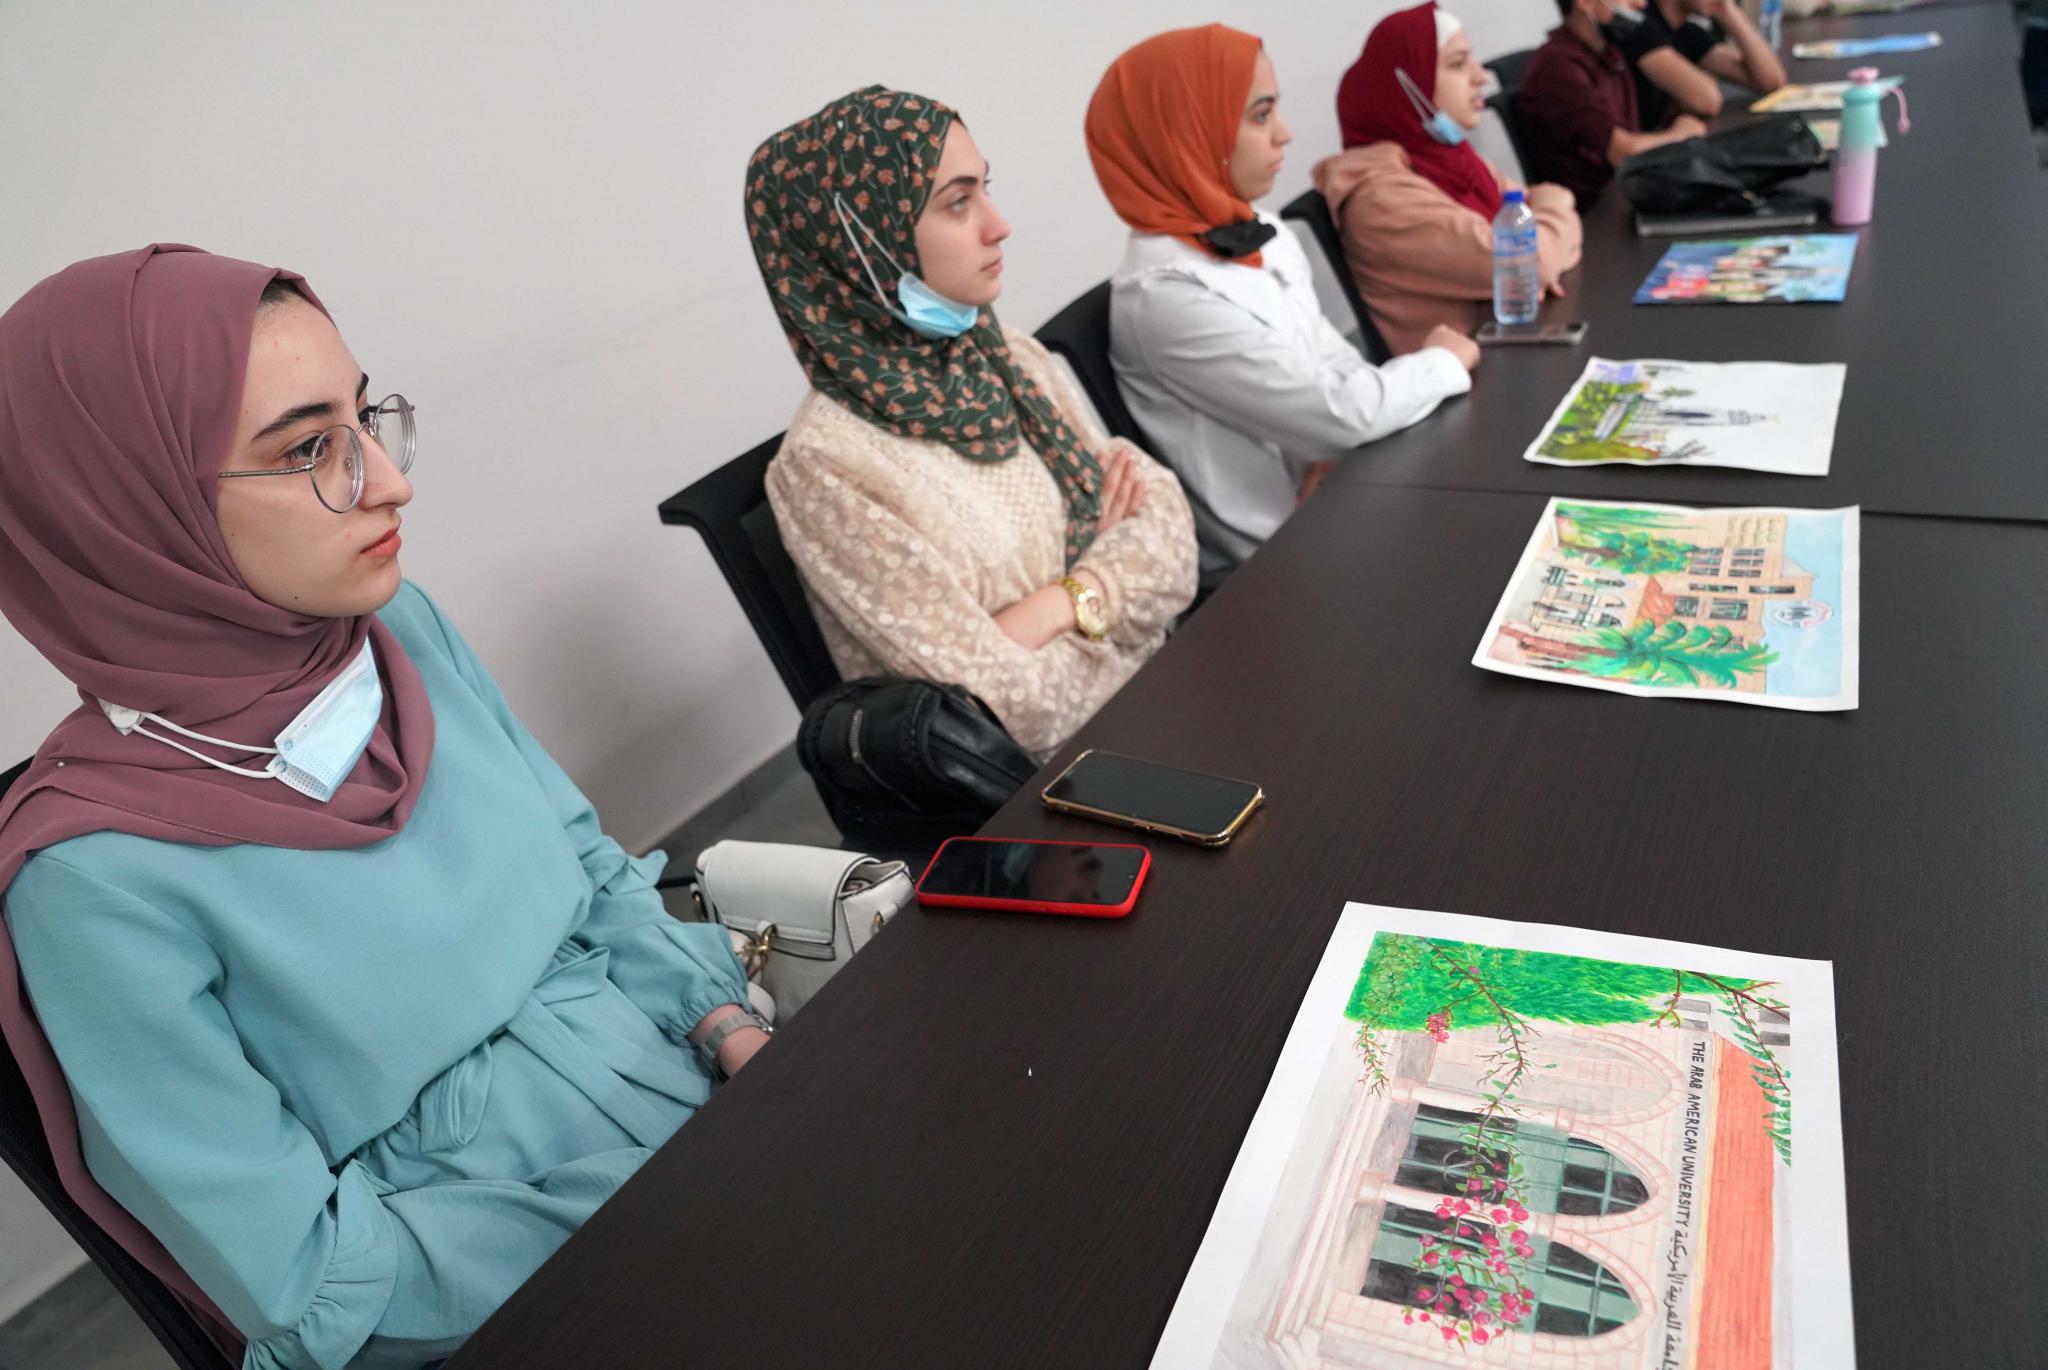 Under Joint Partnership between AAUP and the Ministry of Education, AAUP Organizes Workshops for School Students